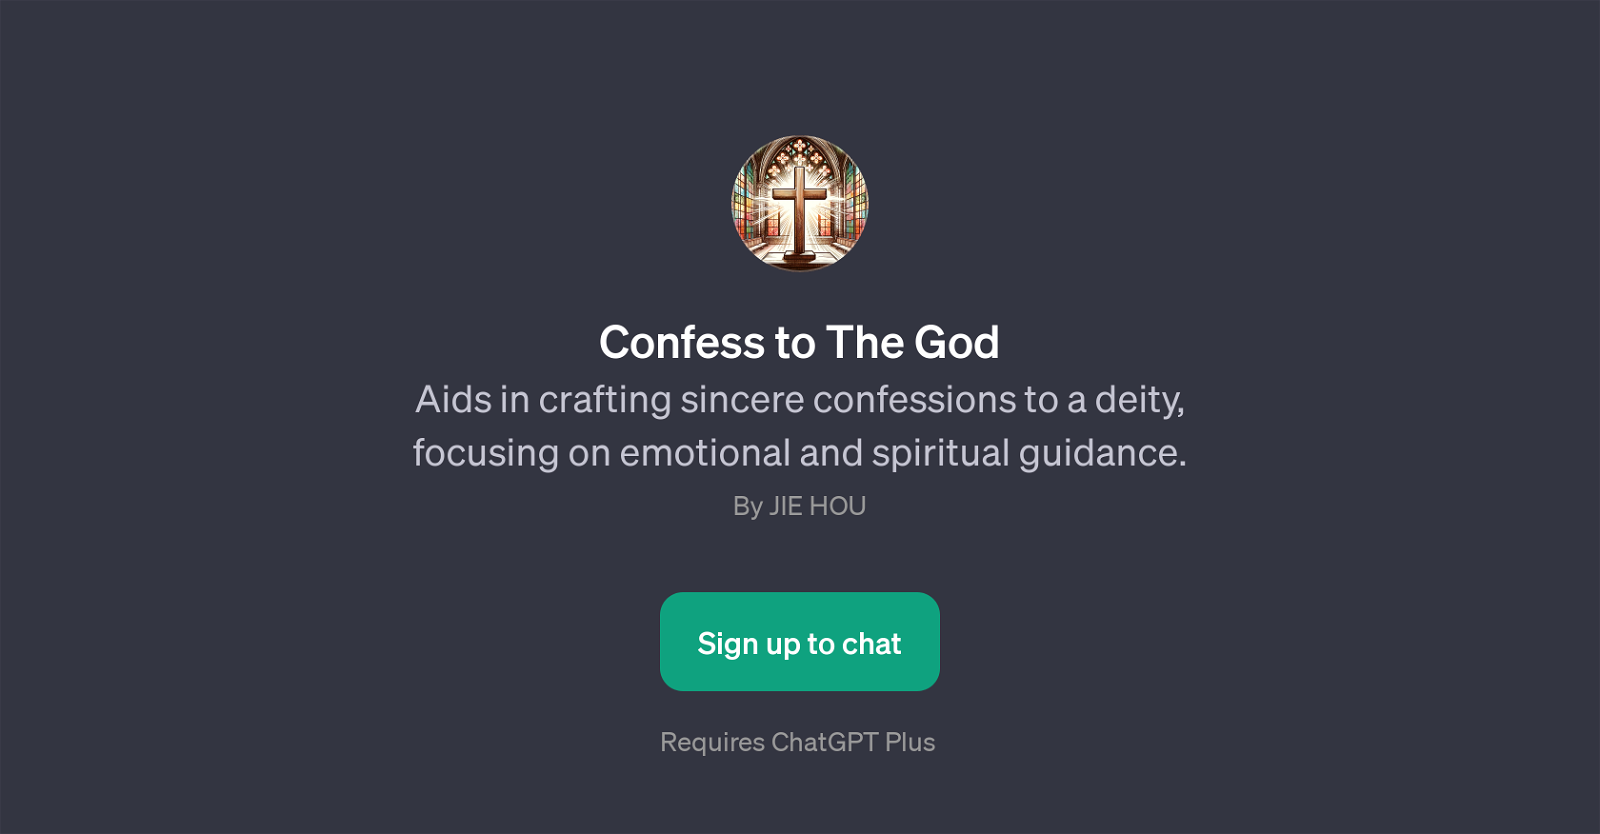 Confess to The God website